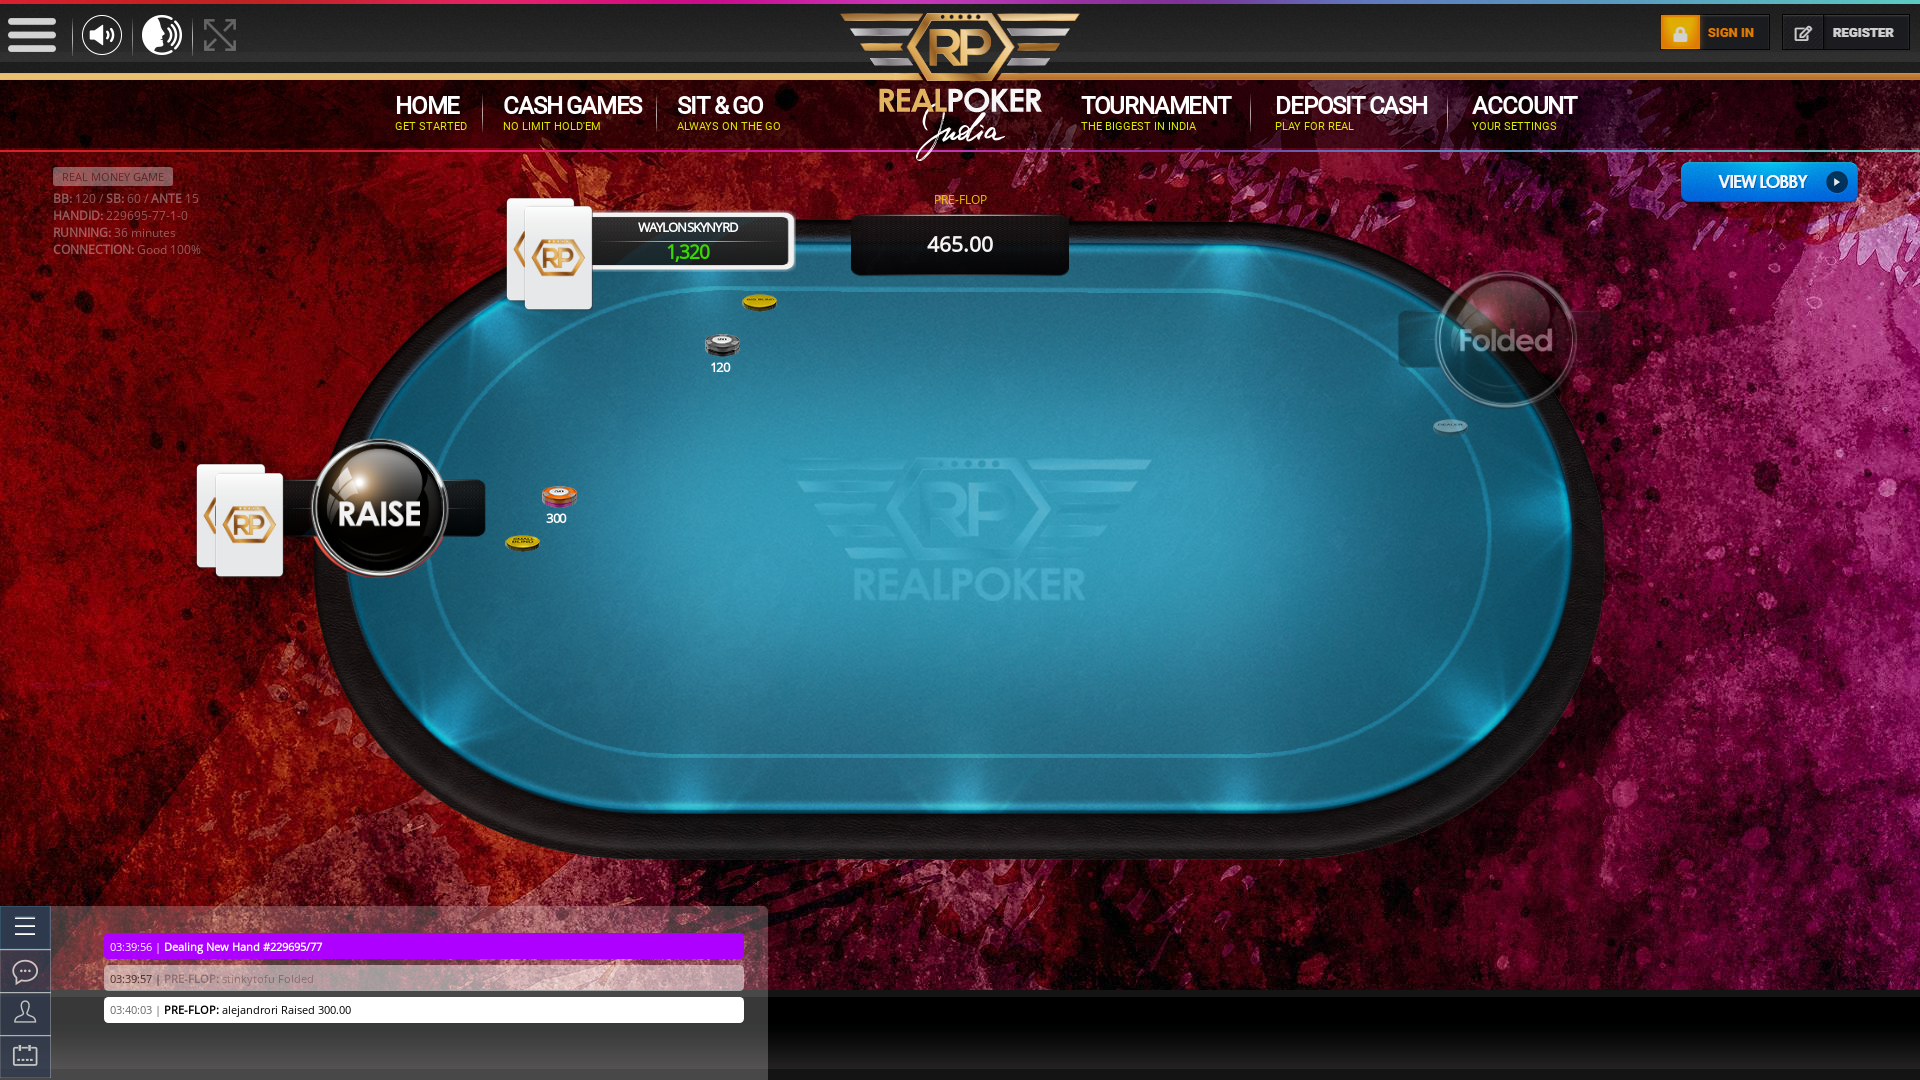 Real poker 10 player table in the 36th minute